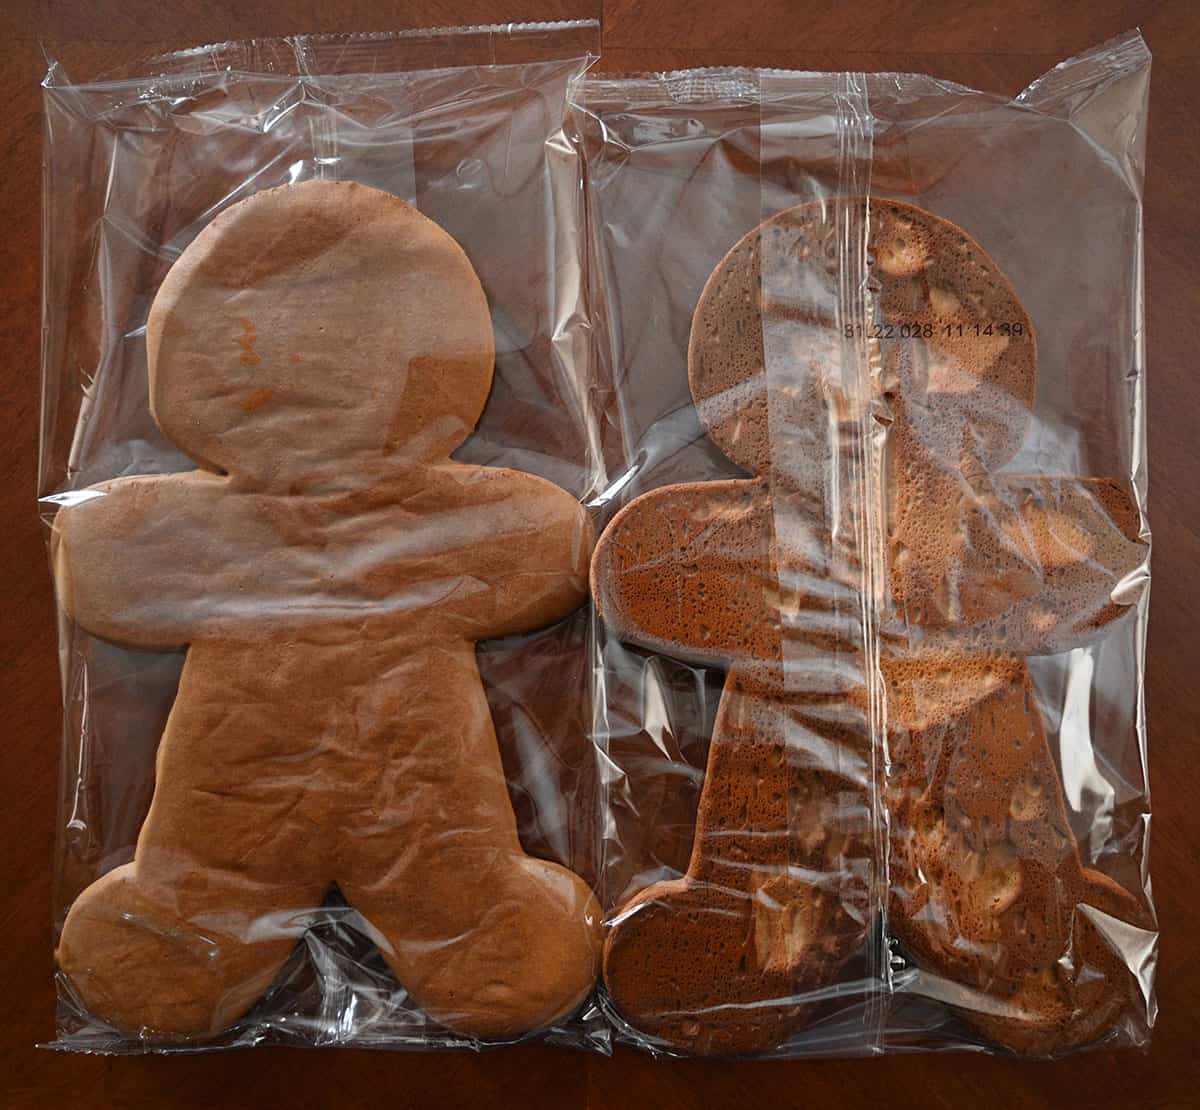 Image of the Kirkland Signature Gingerbread Decorating Kit giant ginger person in the packaging.